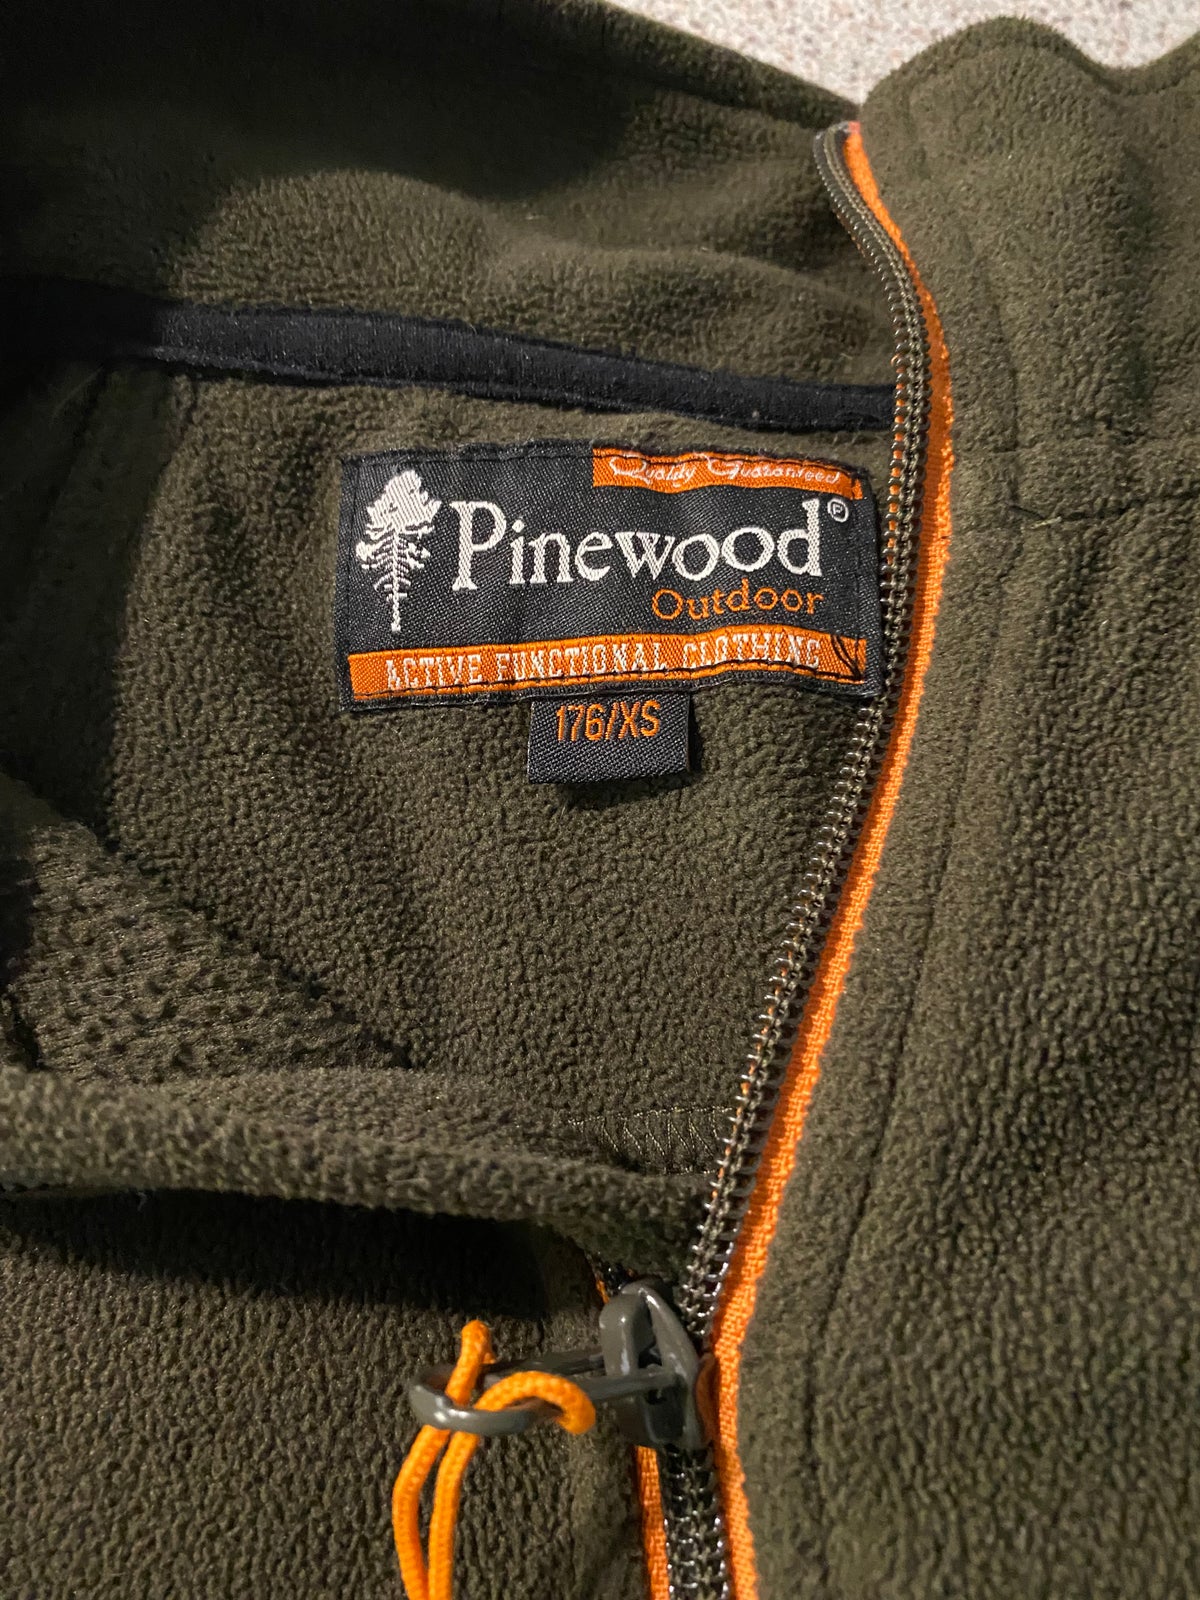 Andet, Pinewood